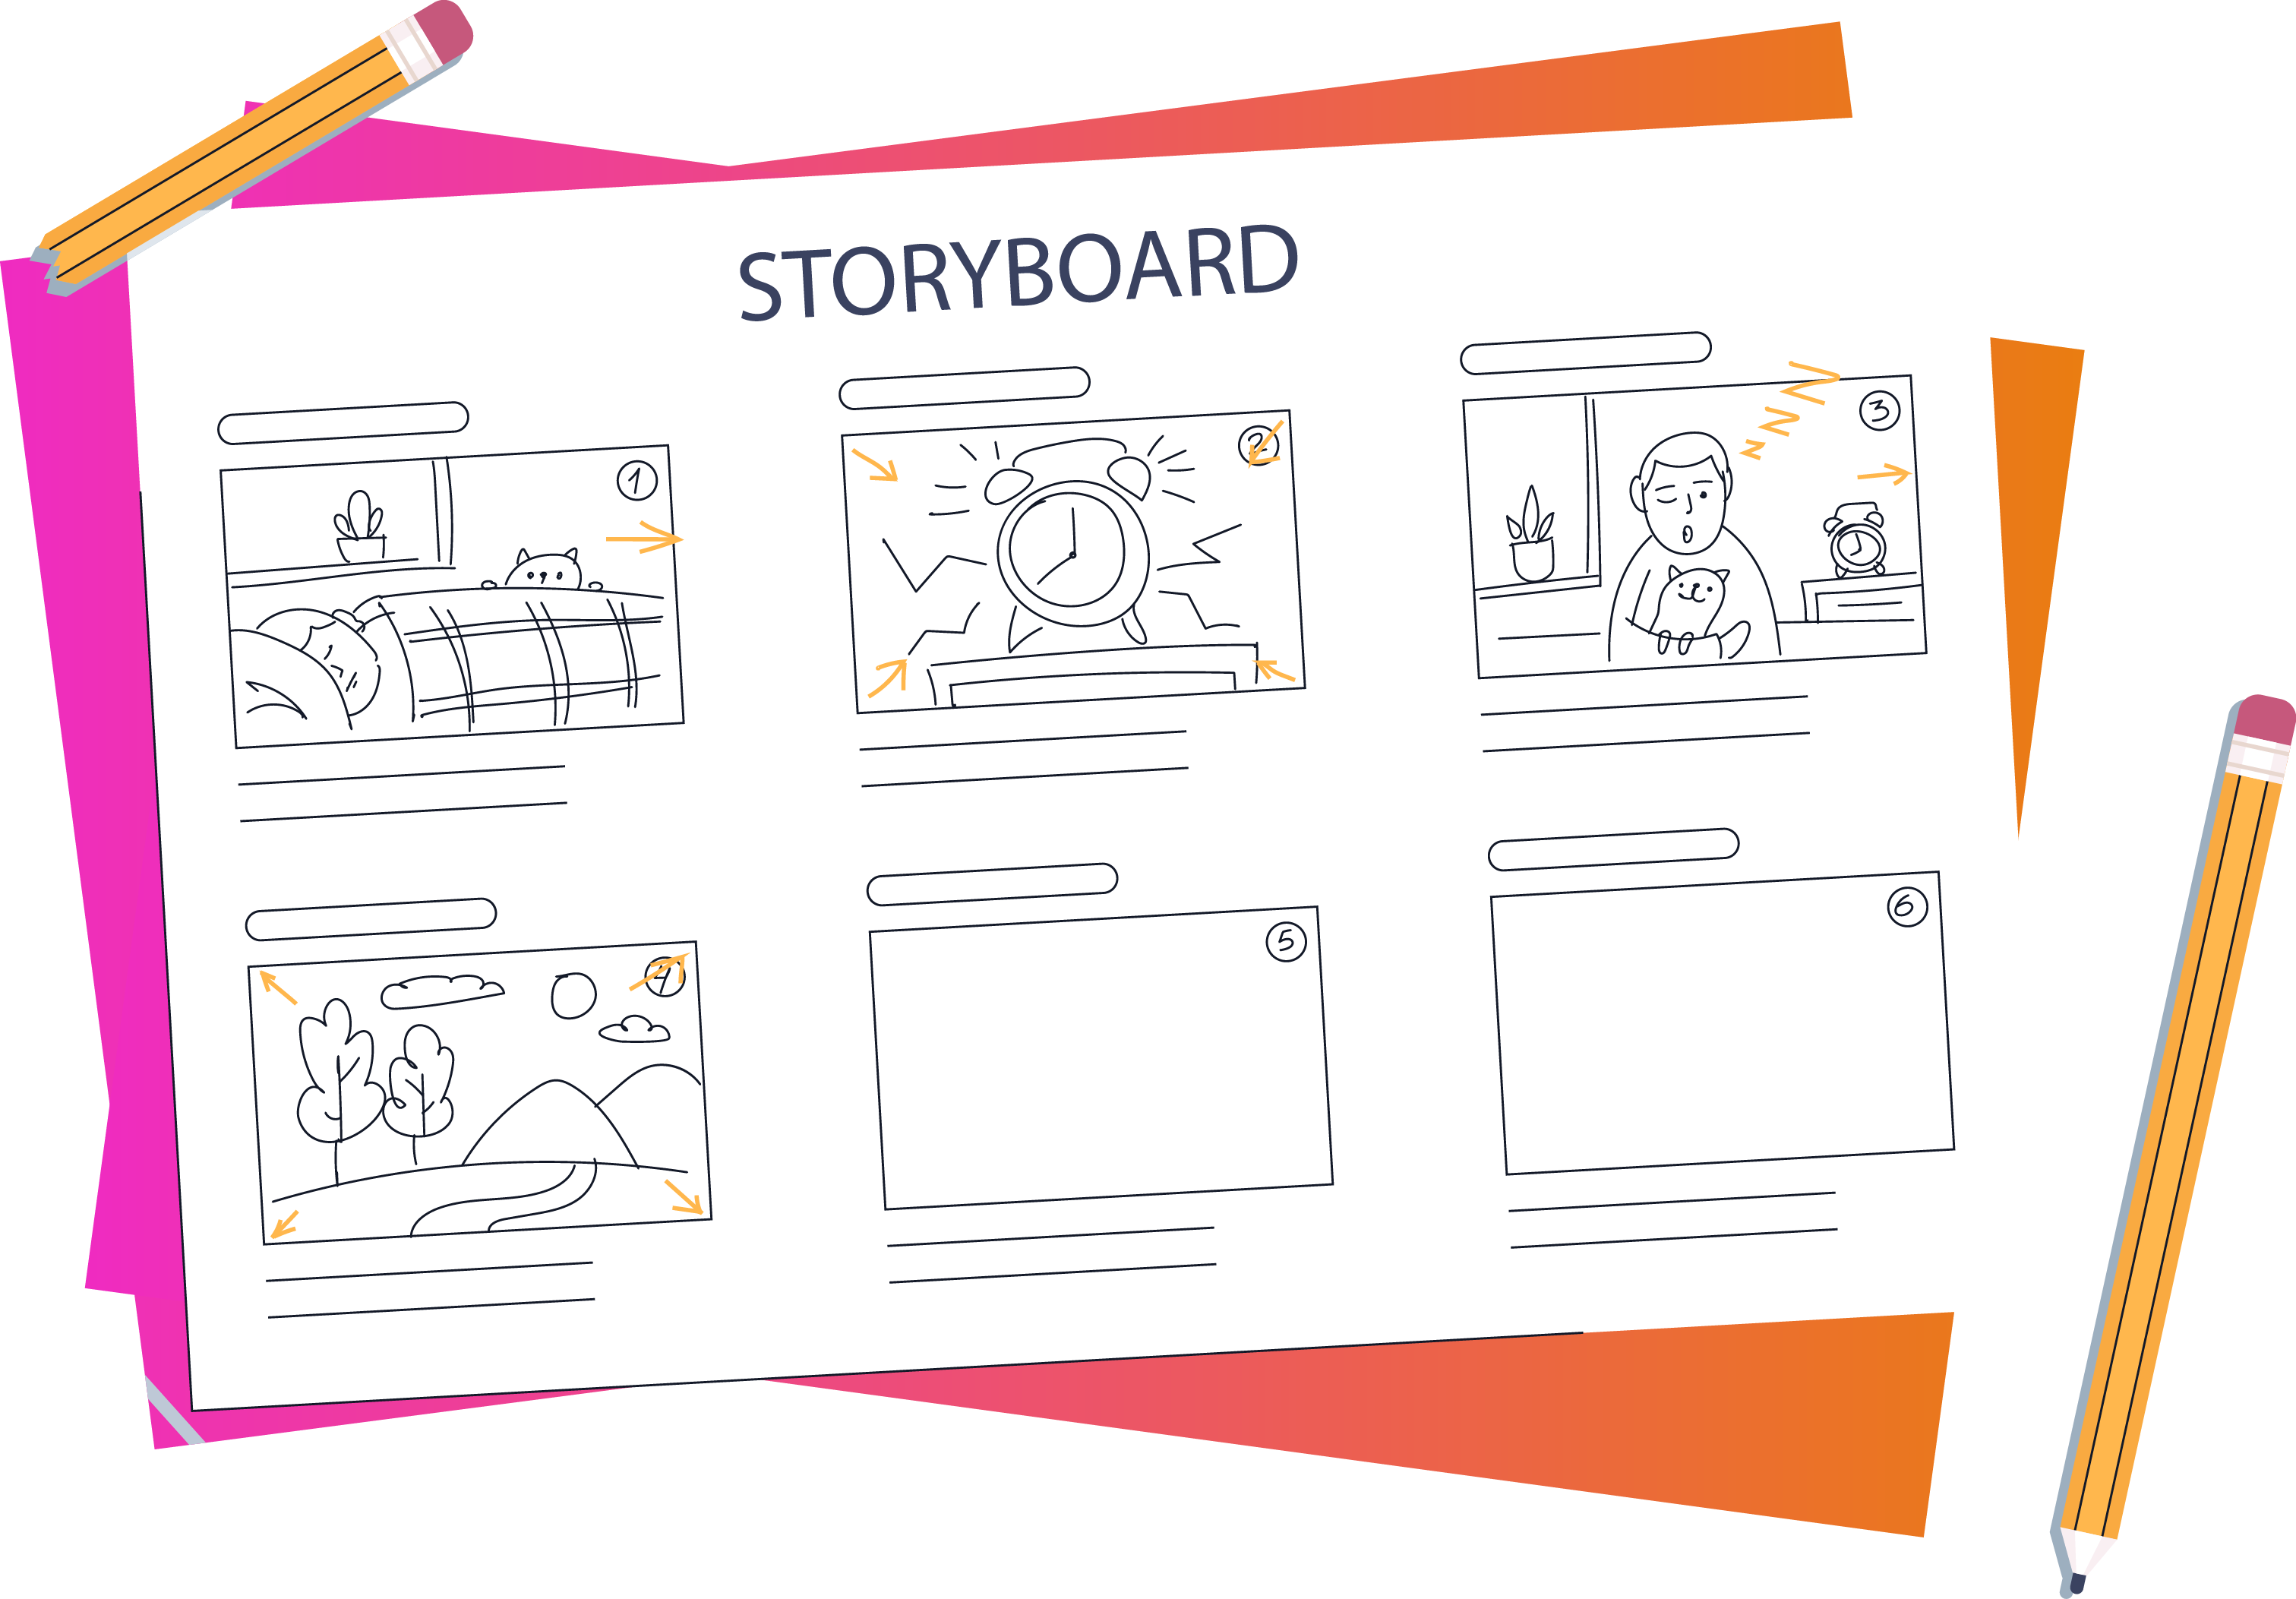 Storyboard design concept by Graphite Work about us page